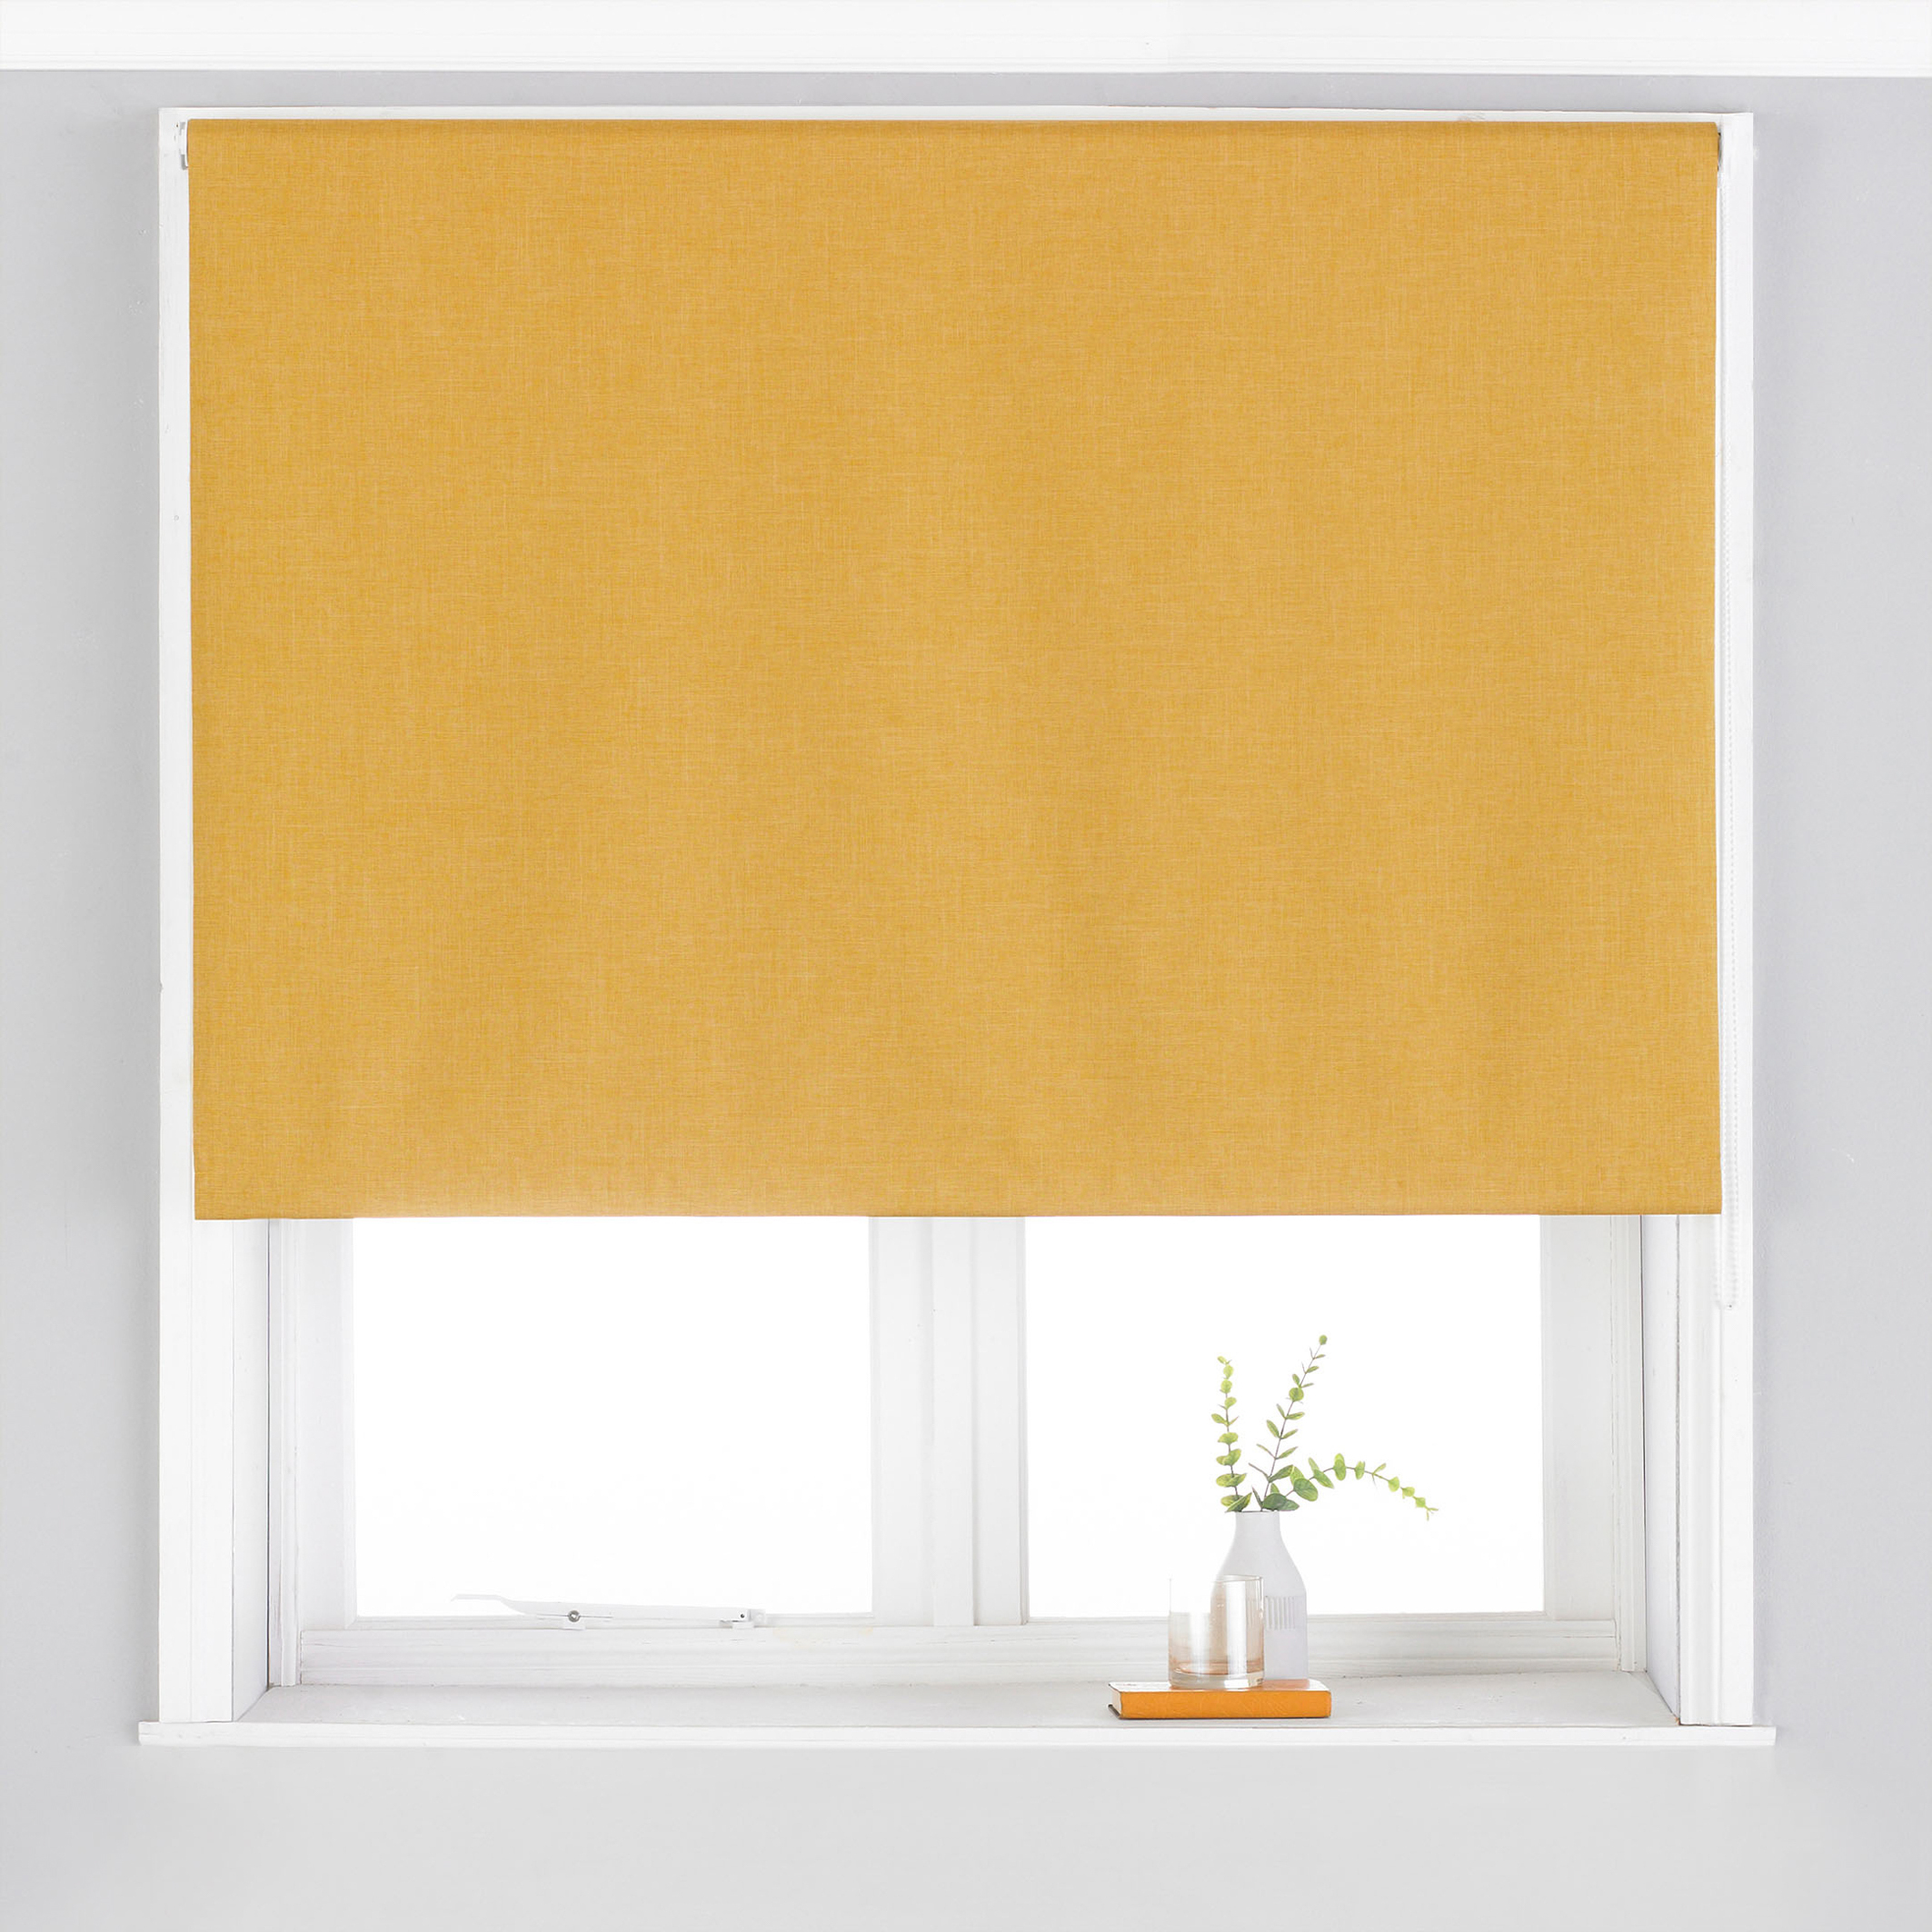 thermal-twighlight-roller-blinds-la-redoute.jpg